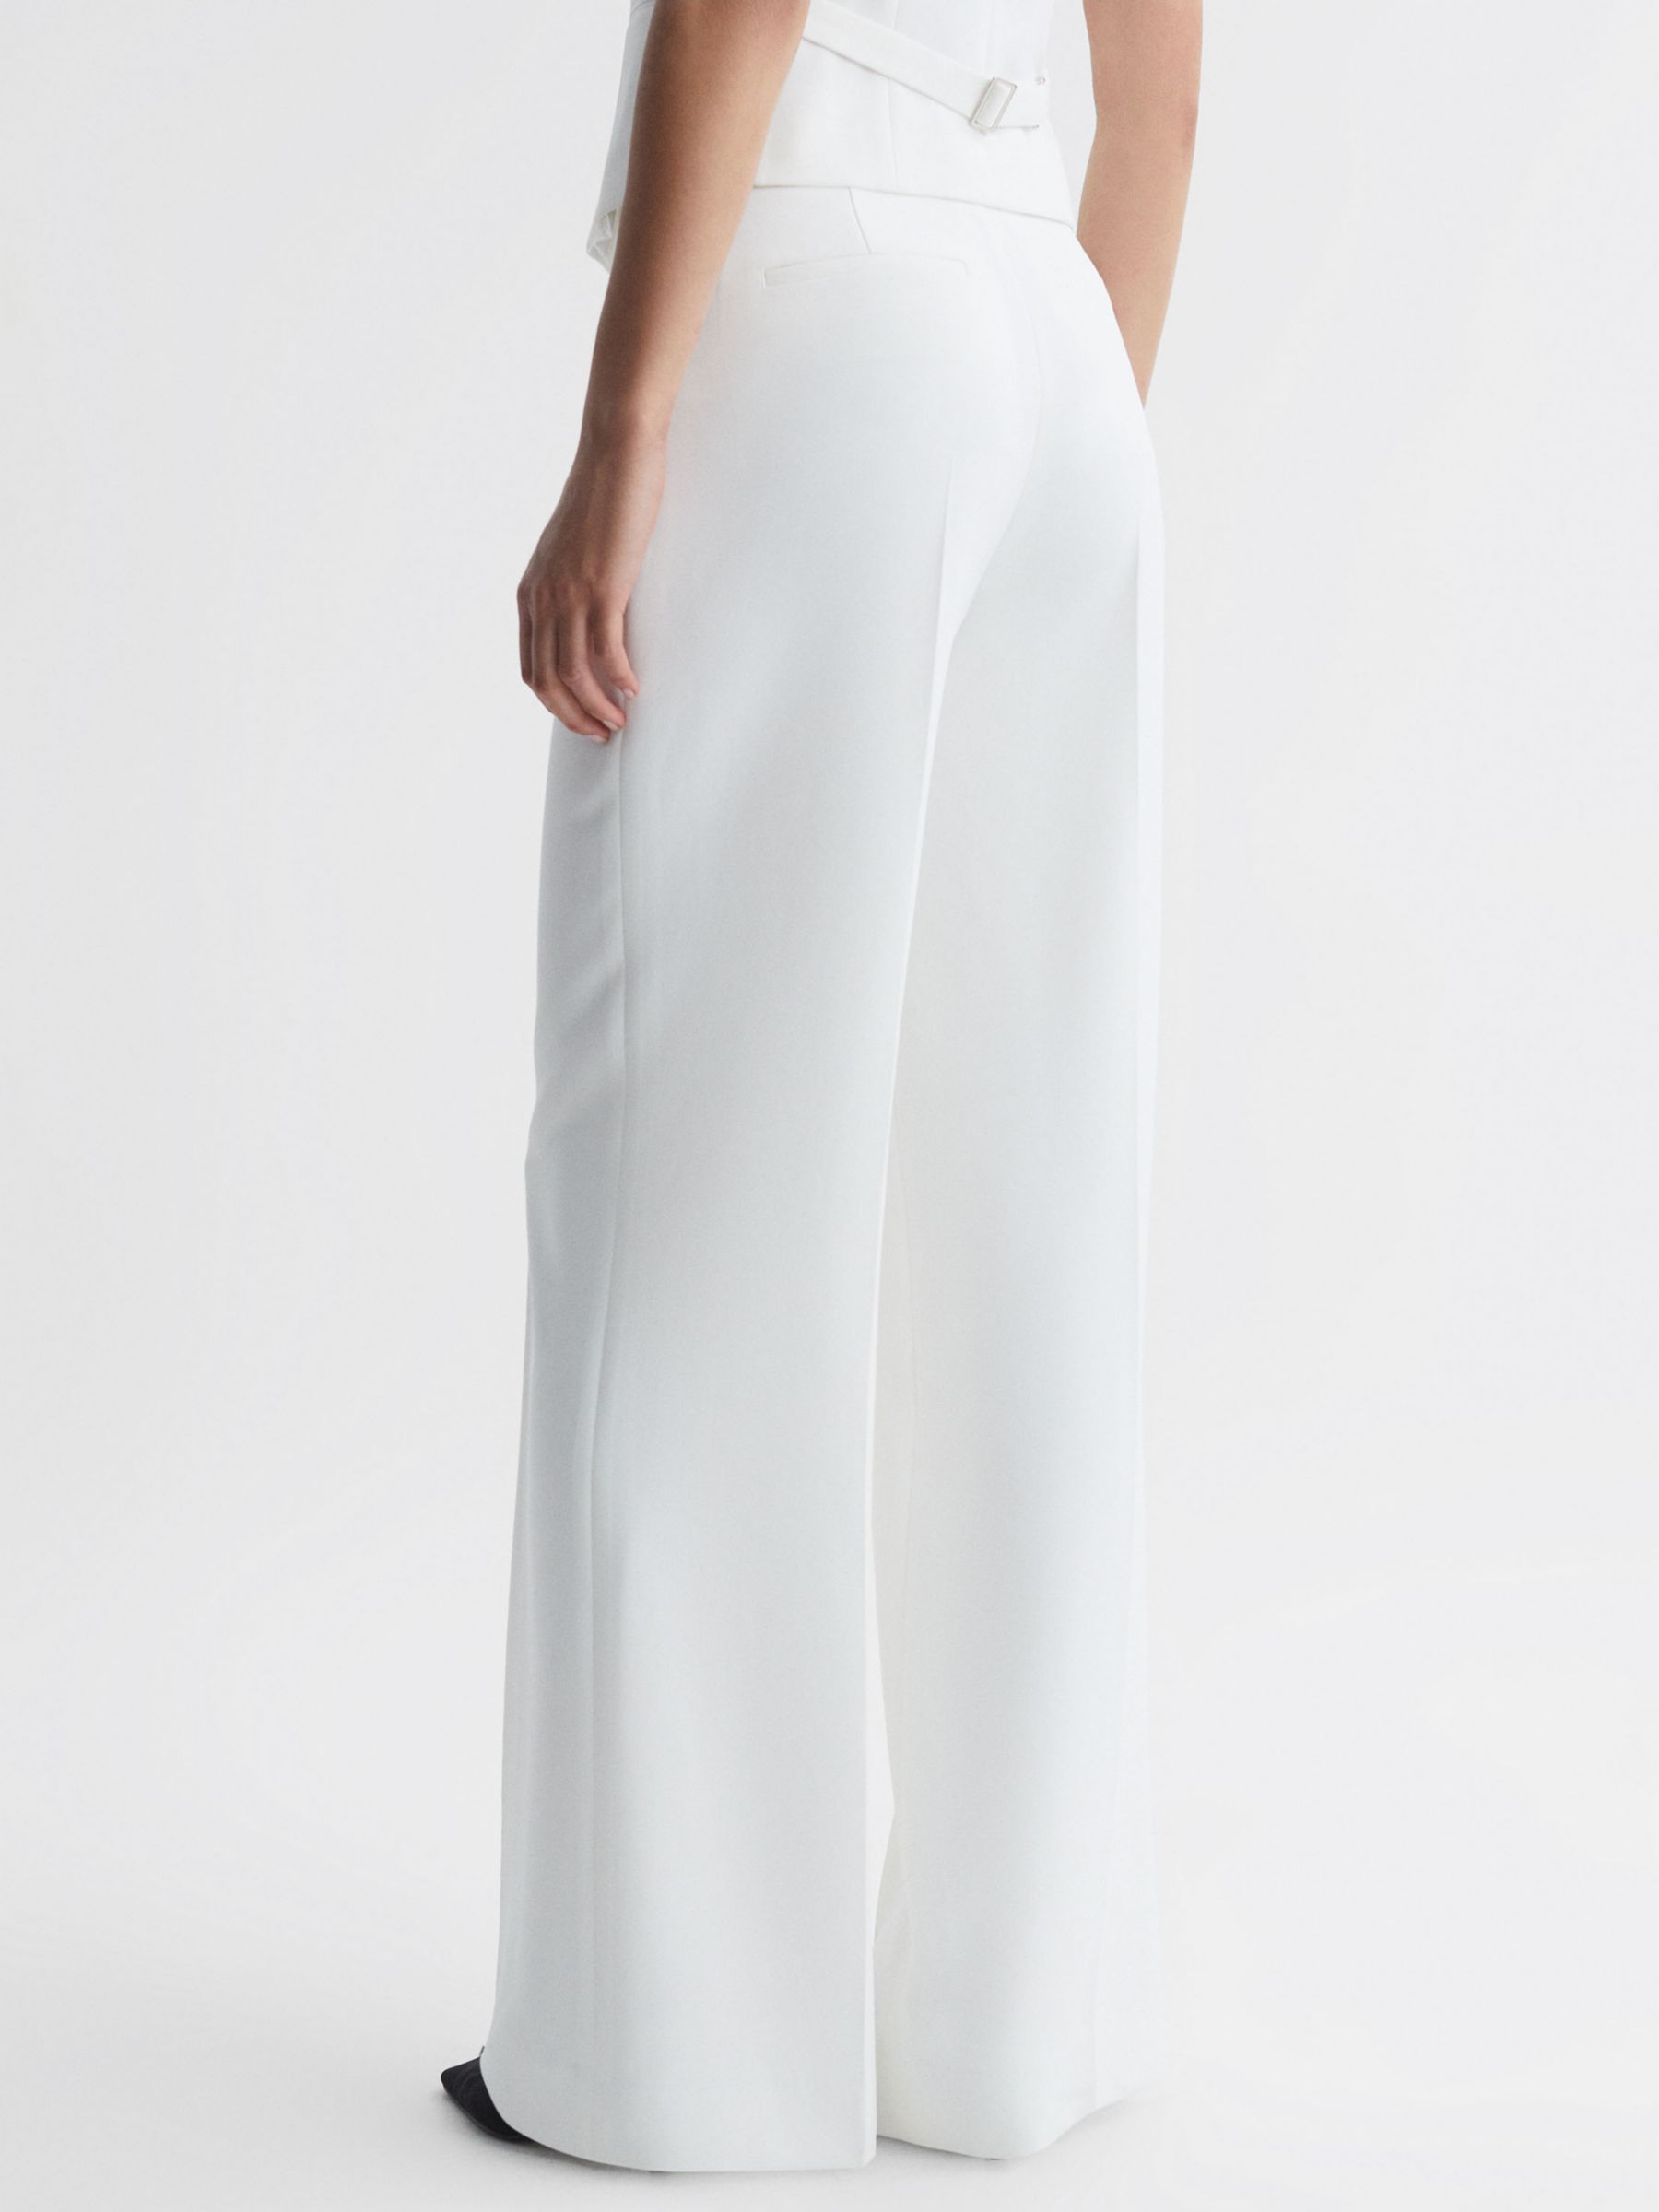 Buy Reiss Petite Sienna Wide Leg Crepe Trousers, White Online at johnlewis.com